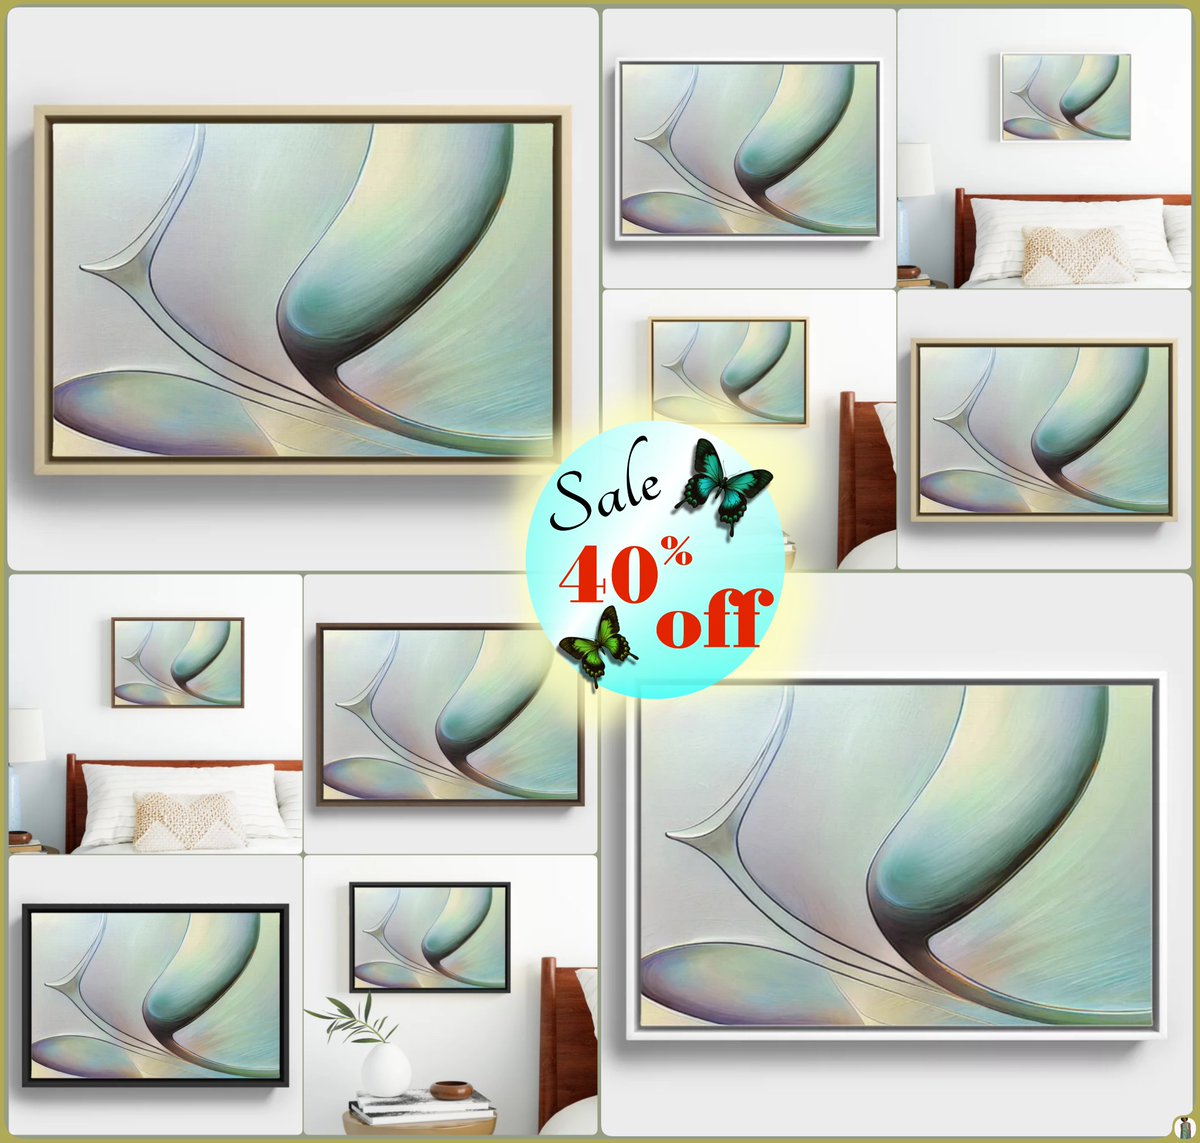 *SALE 40% Off*ENDS TODAY* Quantum Atmosphere Framed Canvas~by Art_Falaxy~ ~Art Exquisite!~ #artfalaxy #art #homedecor #society6 #Society6max #framed #canvas #metal #wallart #wood #trendy #modern #prints society6.com/product/quantu… COLLECTION: society6.com/art/quantum-at…